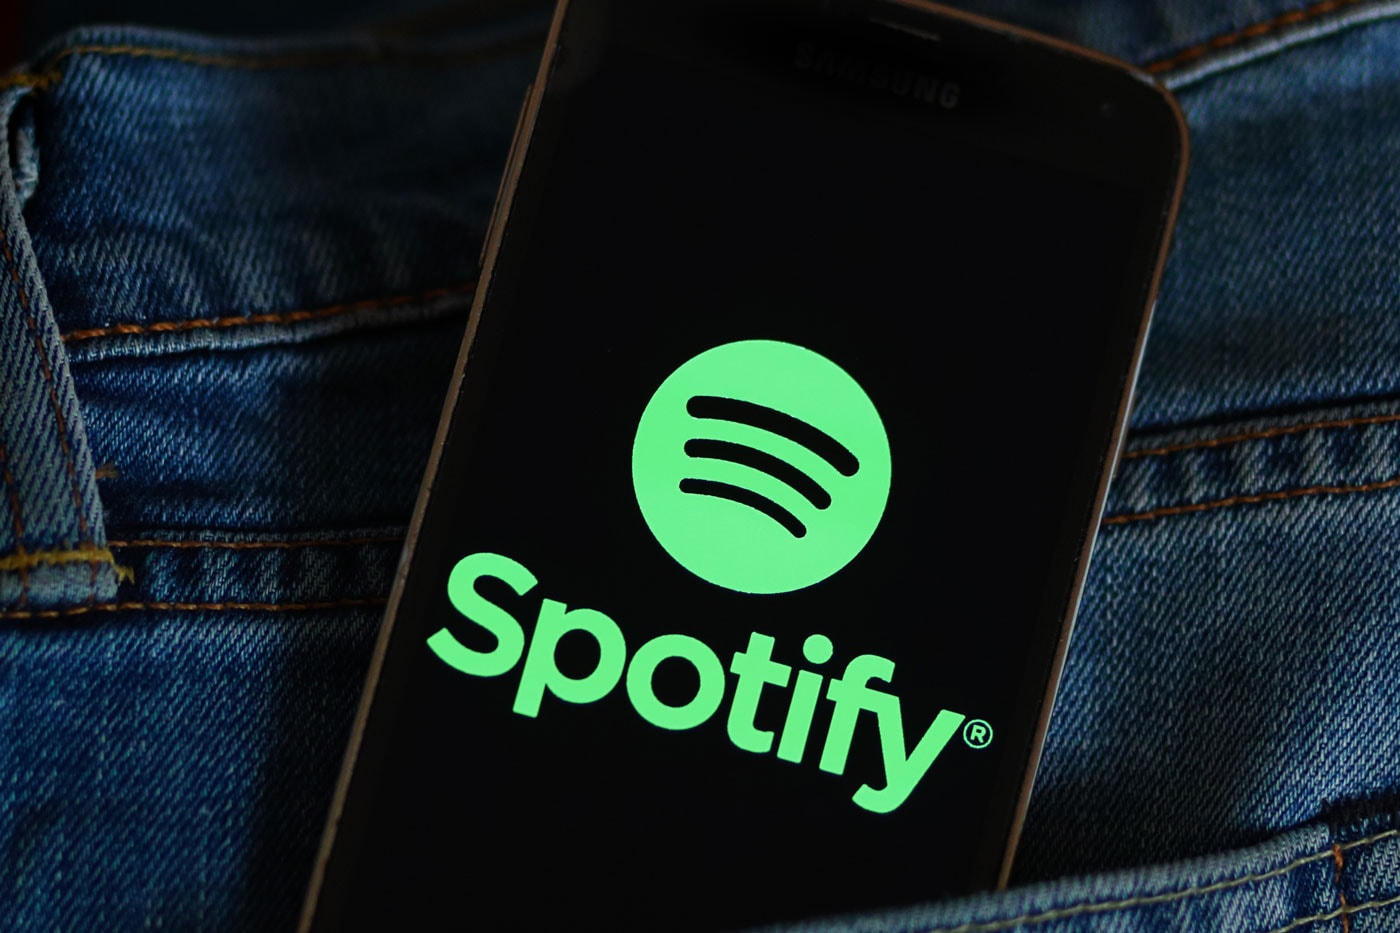 Spotify Introduces “Found Them First" Feature